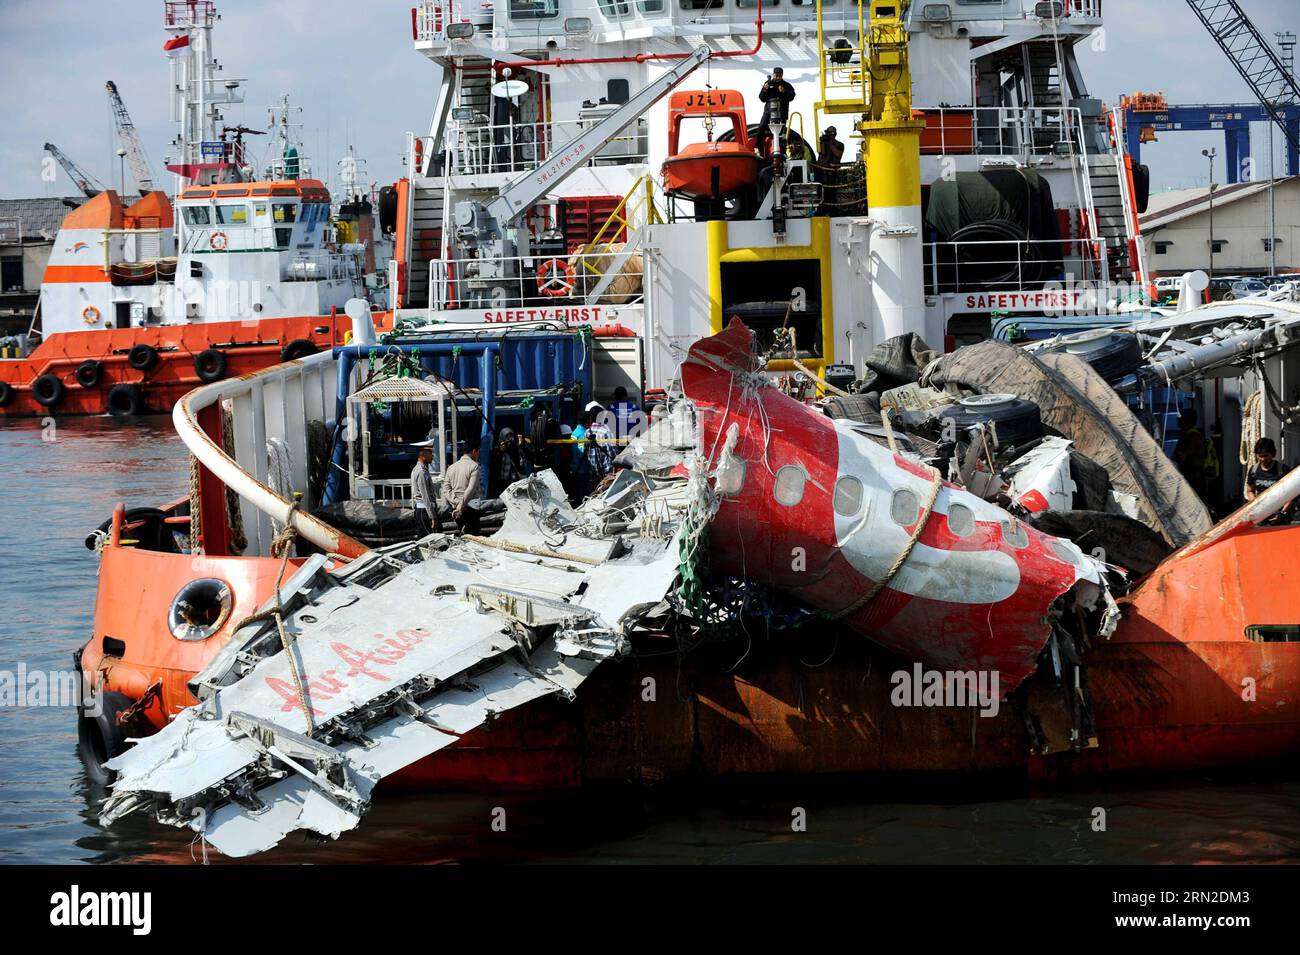 (150302) -- JAKARTA, March 2, 2015 -- A large part of AirAsia QZ 8501 fuselage is lifted from the rescue ship Crest Onyx at Tanjung Priok harbor in Jakarta, Indonesia, March 2, 2015. Indonesian officials said on Saturday that the final major part of the fuselage of the AirAsia QZ 8501 has been retrieved. AirAsia QZ 8501 was crashed in Karimata Strait enroute from Indonesia s city of Surabaya for Singapore on Dec. 28, killing all 162 people onboard. ) INDONESIA-JAKARTA-AIRASIA-PLANE-RETRIEVAL AgungxKuncahyaxB. PUBLICATIONxNOTxINxCHN   Jakarta March 2 2015 a Large Part of AirAsia  8501 fuselage Stock Photo